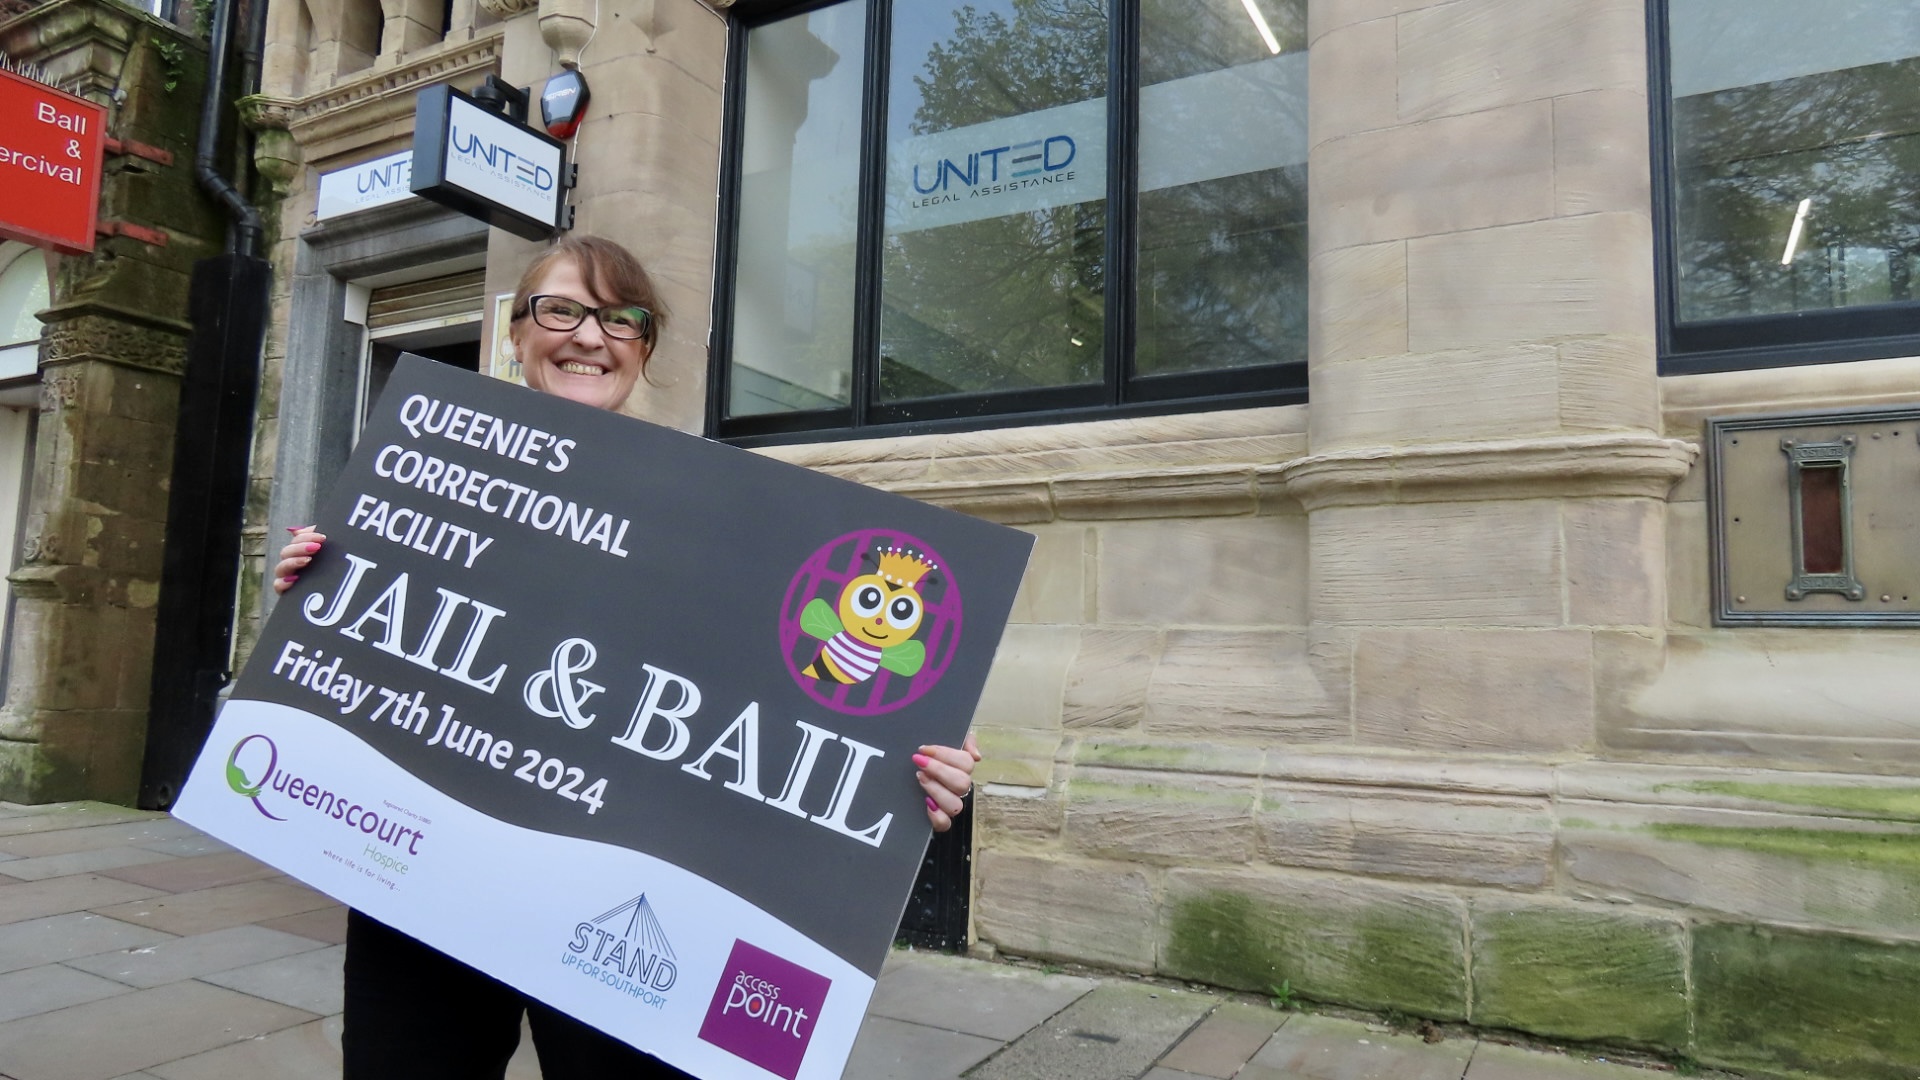 Jocelyn Pye, a Motor Claims Handler at United Legal Assistance in Southport, is taking part in the Jail and Bail fundraiser for Queenscourt Hospice. 